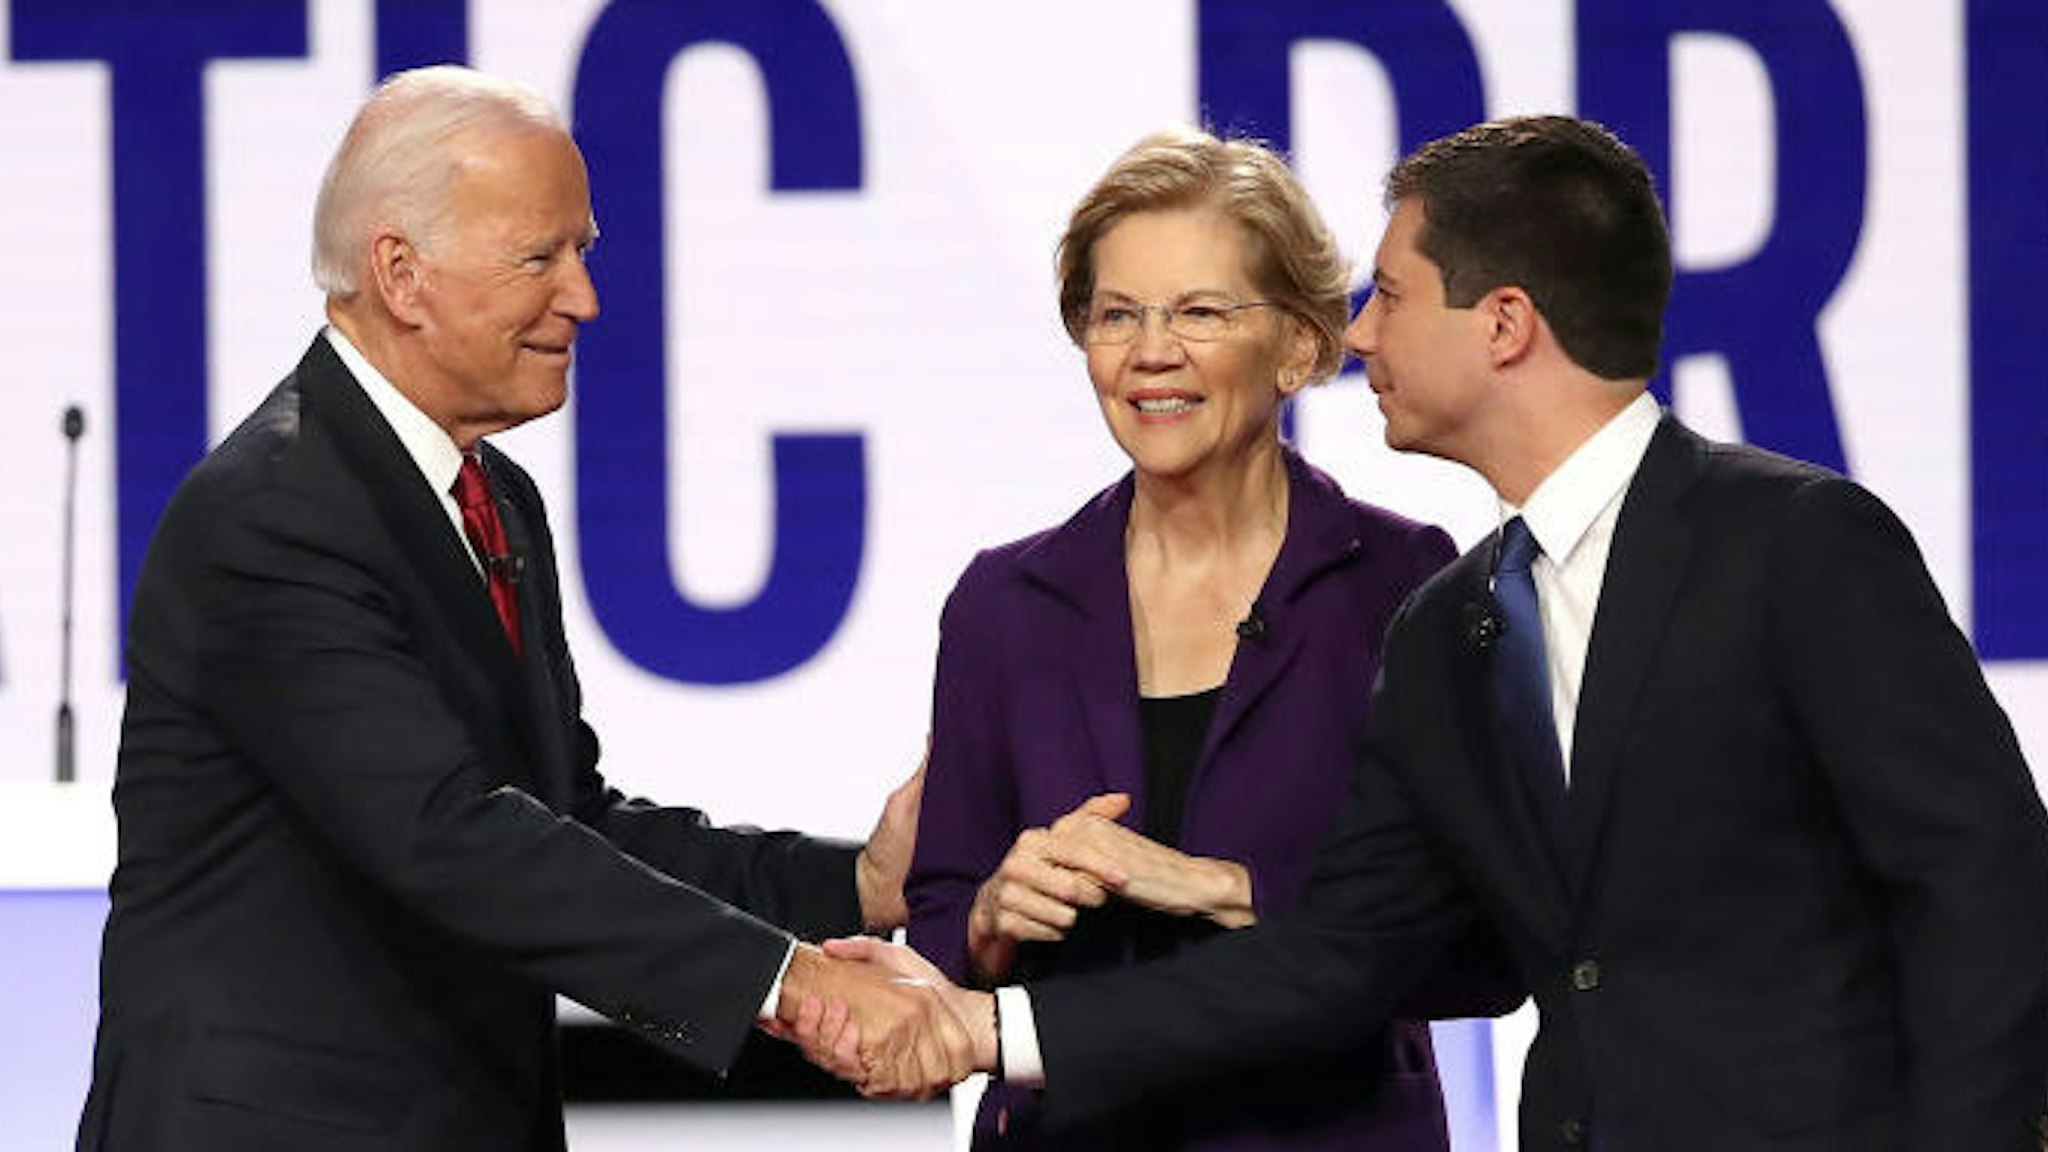 Democratic presidential candidates (L-R) Sen. Bernie Sanders (I-VT), former Vice President Joe Biden, Sen. Elizabeth Warren (D-MA) and South Bend, Indiana Mayor Pete Buttigieg enter the stage before the Democratic Presidential Debate at Otterbein University on October 15, 2019 in Westerville, Ohio. A record 12 presidential hopefuls are participating in the debate hosted by CNN and The New York Times. (Photo by Win McNamee/Getty Images)